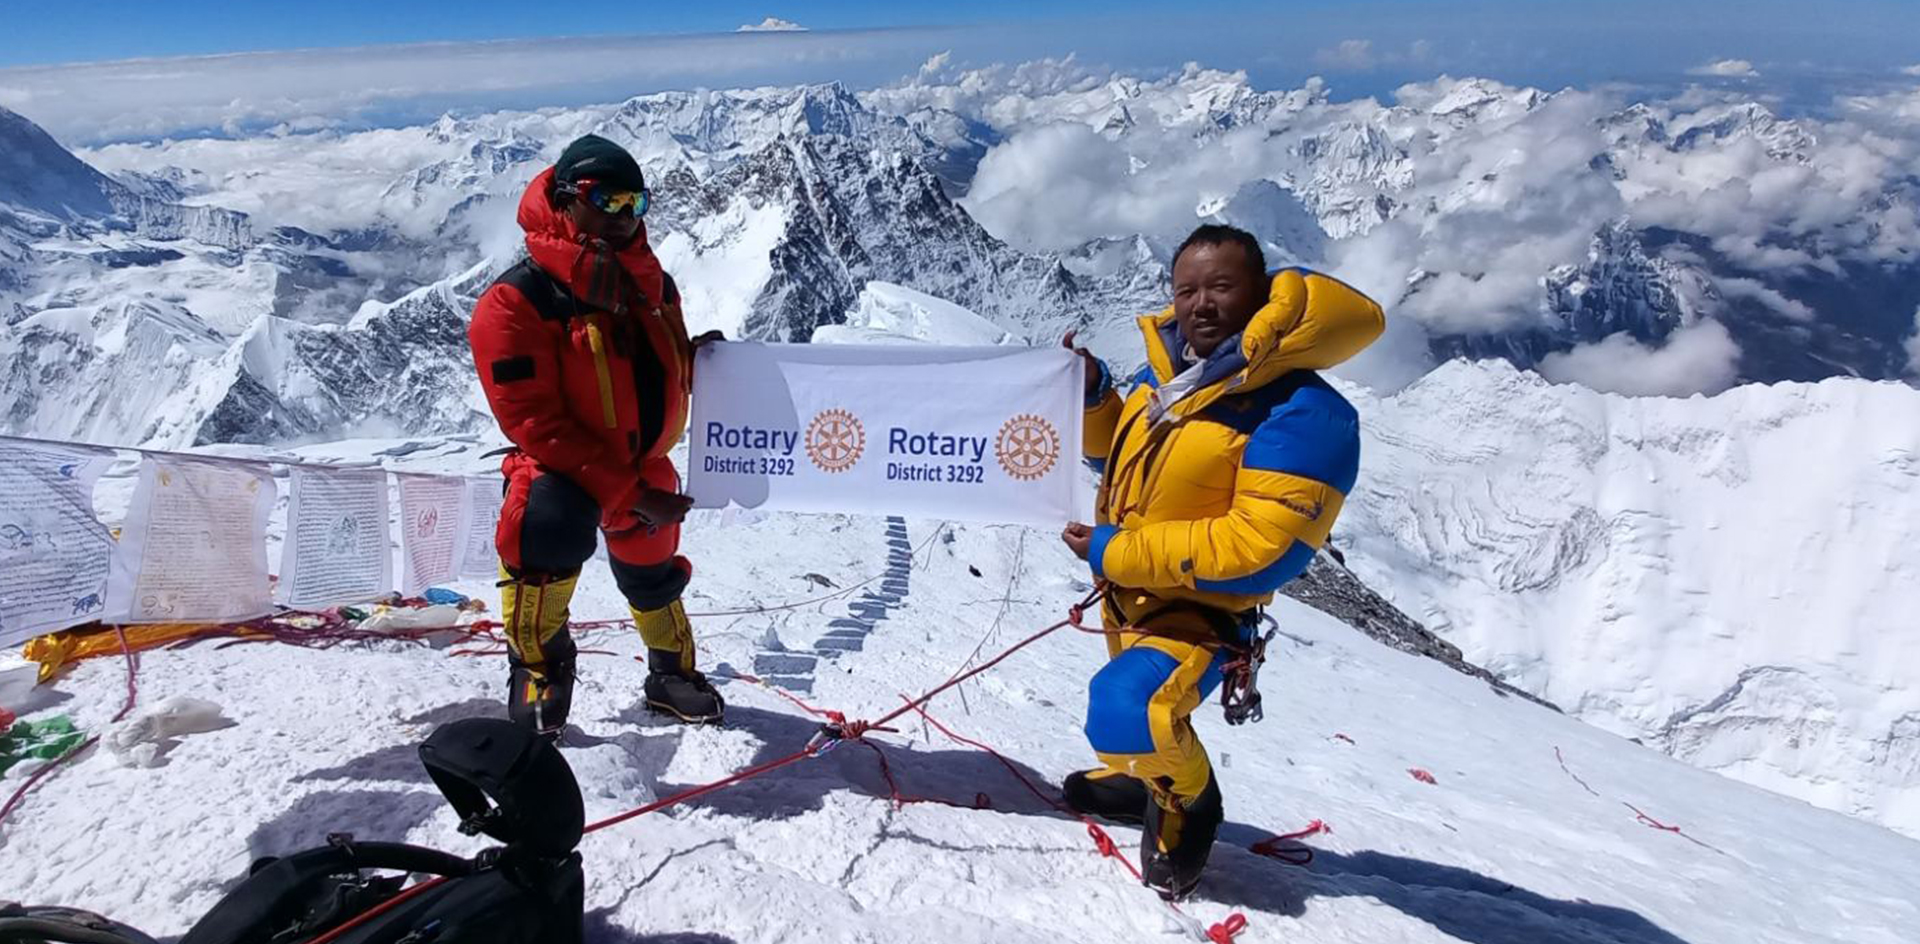 Rotary flag on top of Everest